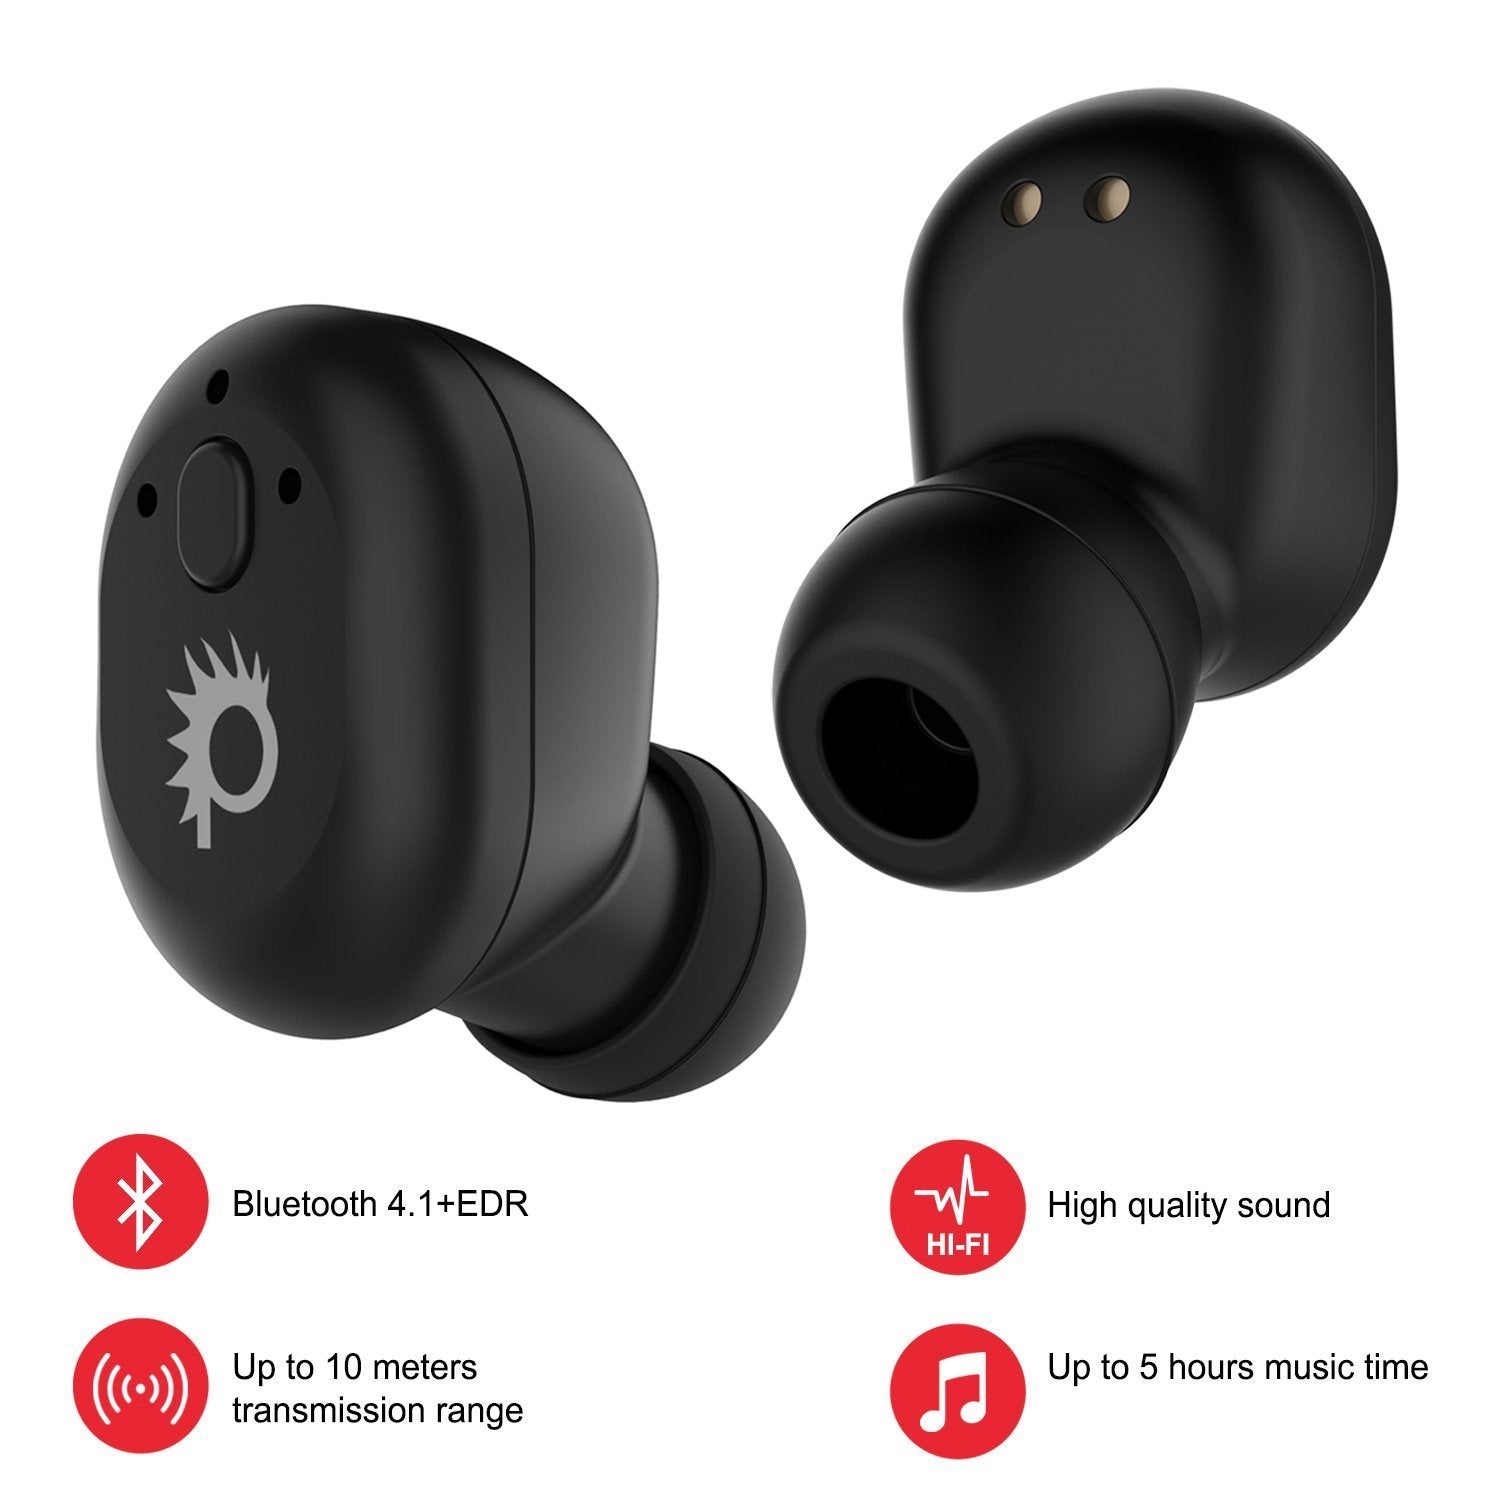 PunkBuds Capsule True Wireless Bluetooth Earbuds W/Noise Cancelling Mic IP67 Waterproof Storage & Fast Charger Case W/Built-In Speaker, Reliable Bluetooth 4.1 Technology & Long Battery Life [Black] - PunkCase NZ